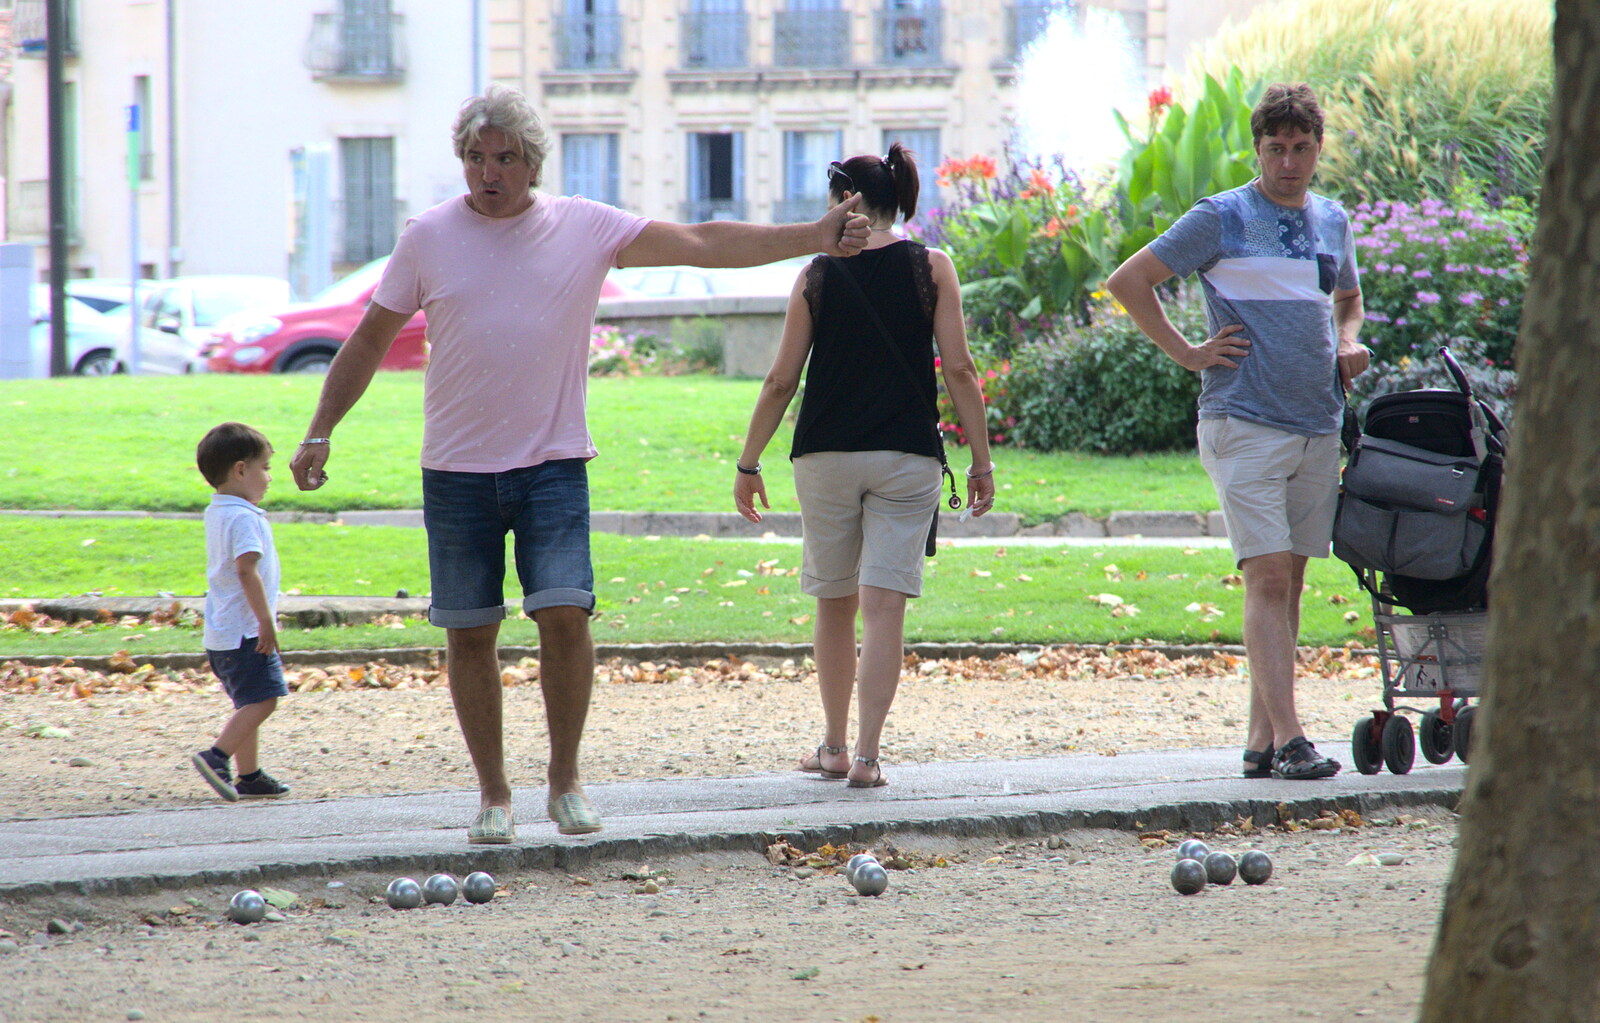 Thumbs up during a game of Petanque from Le Gouffre Géant and Grotte de Limousis, Petanque and a Lightning Storm, Languedoc, France - 12th August 2018